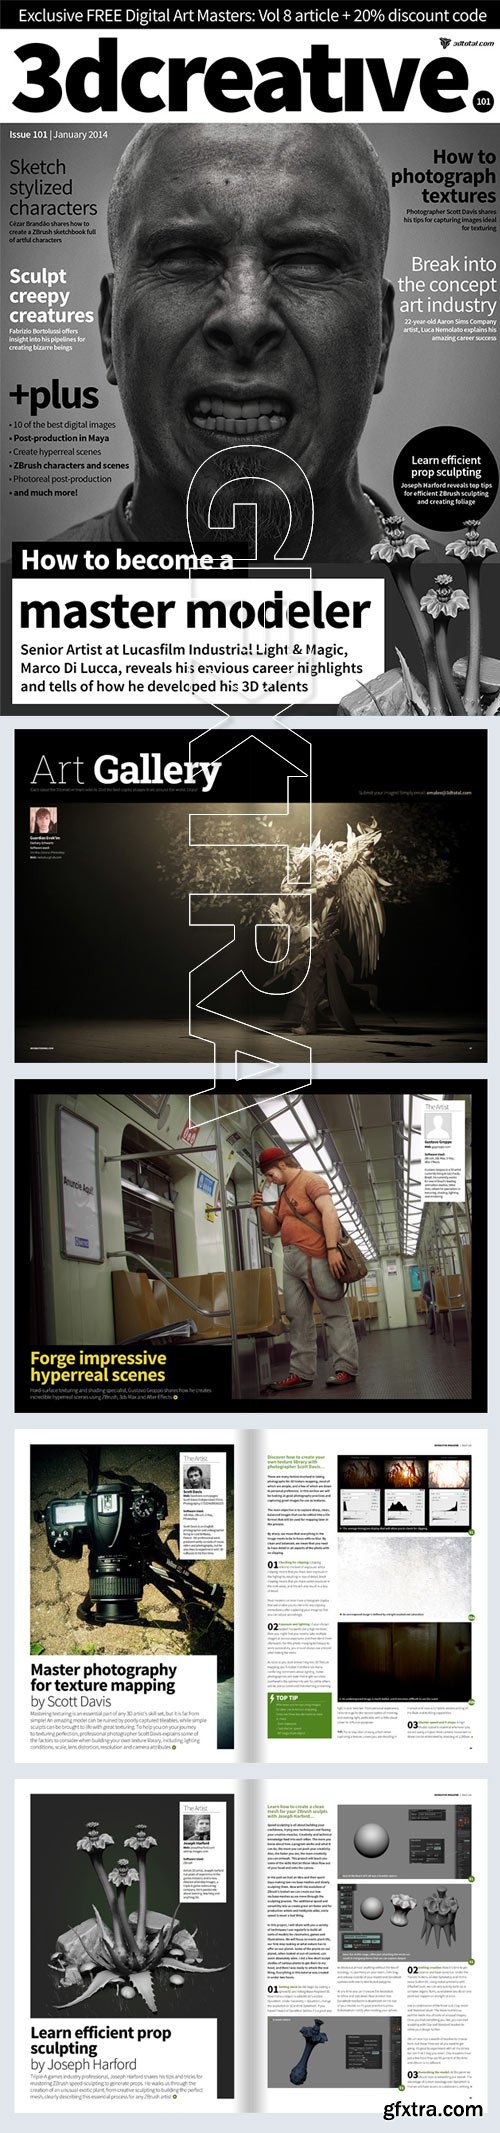 3DCreative: Issue 101 - January 2014 HiRes